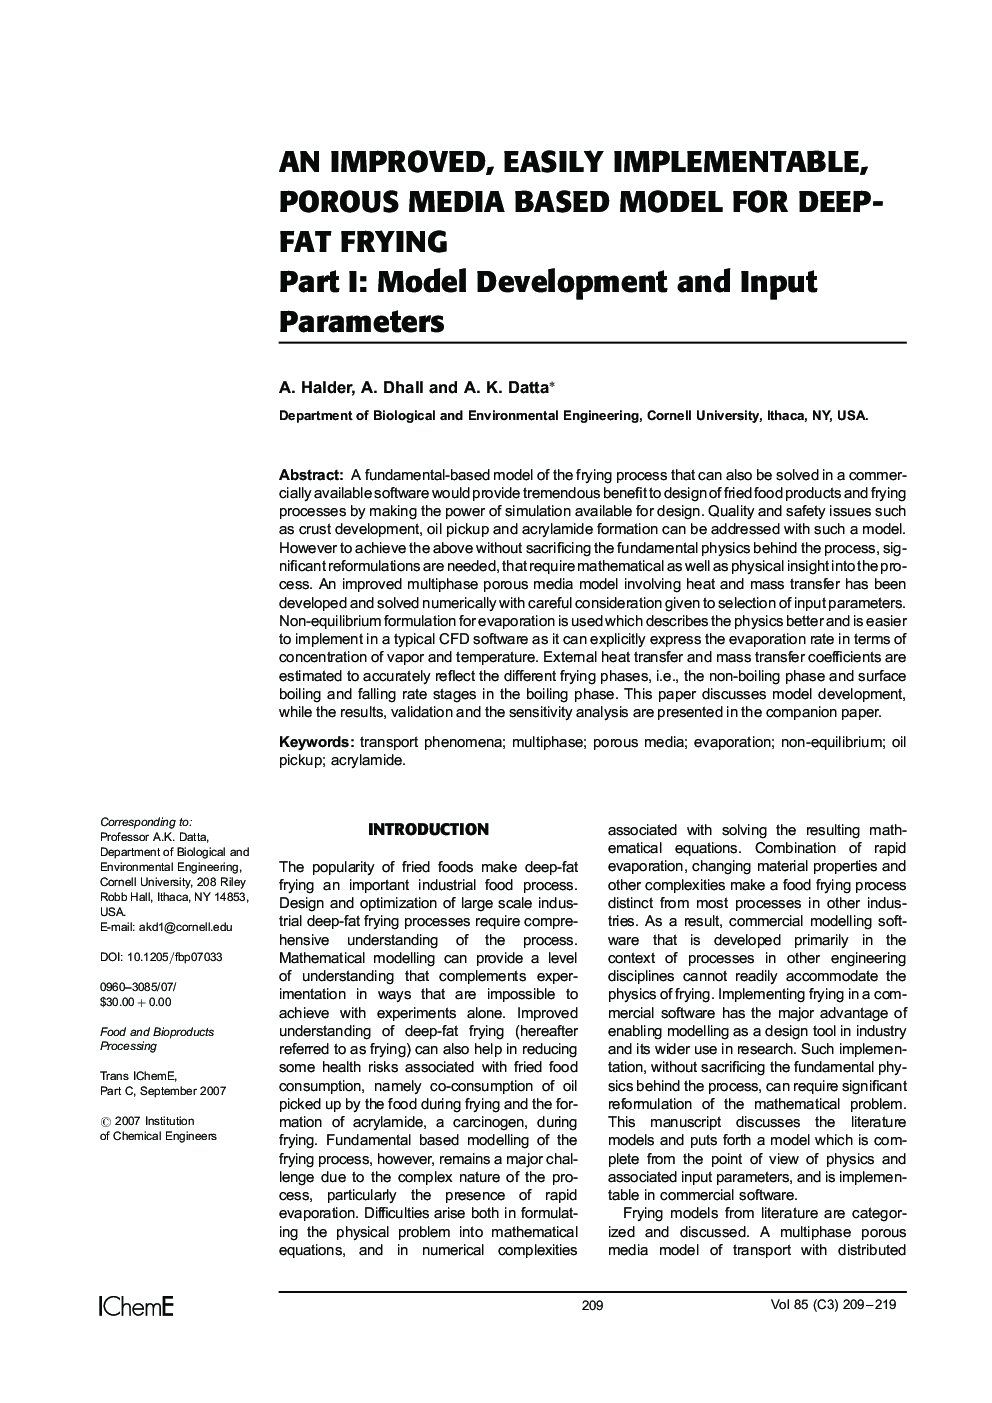 An Improved, Easily Implementable, Porous Media Based Model for Deep-Fat Frying: Part I: Model Development and Input Parameters